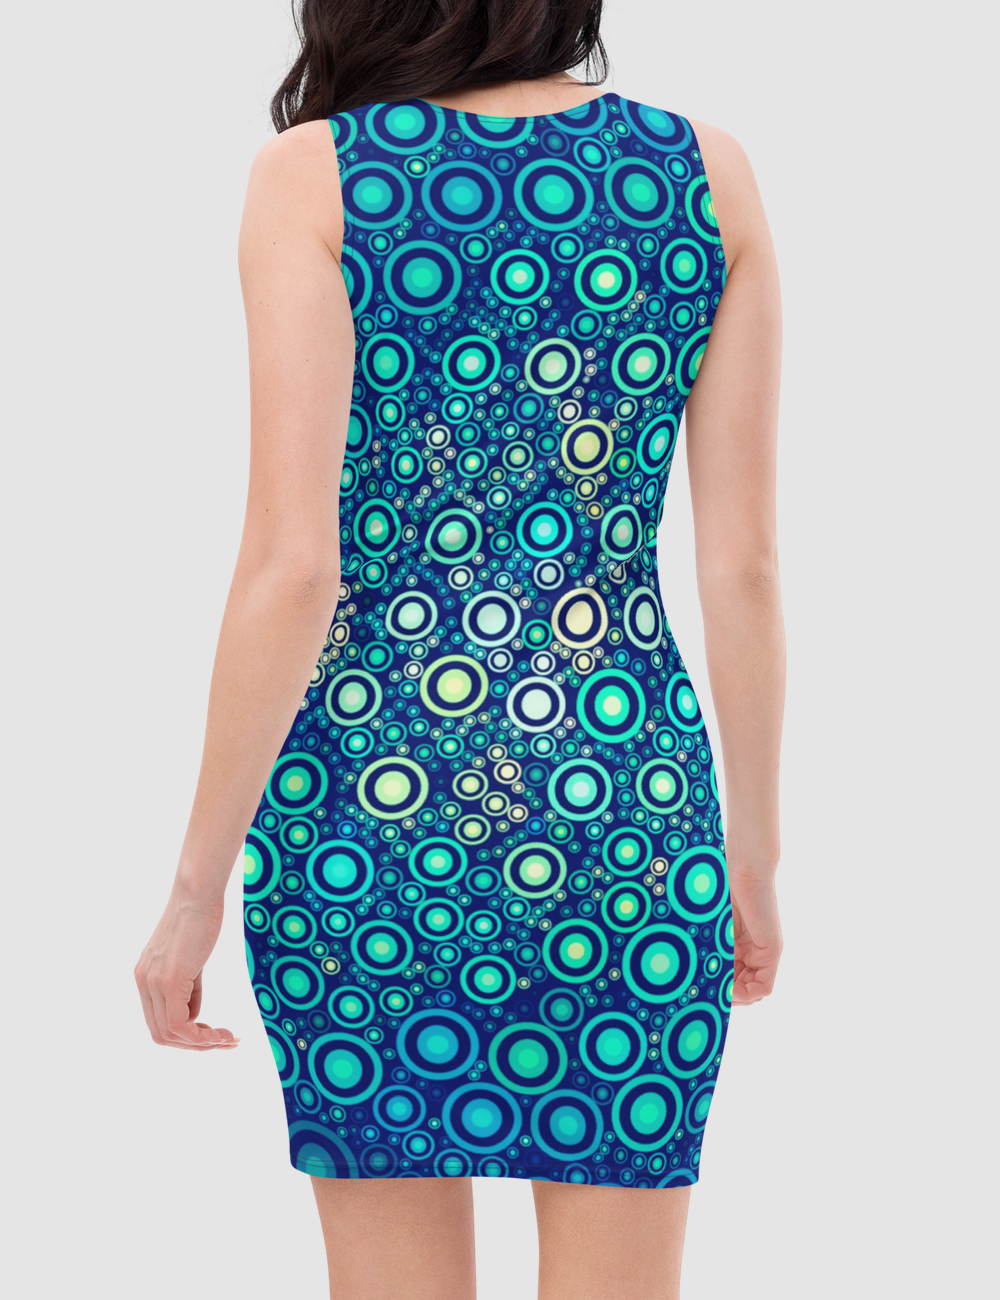 Radical Blue Orbs | Women's Sleeveless Fitted Sublimated Dress OniTakai